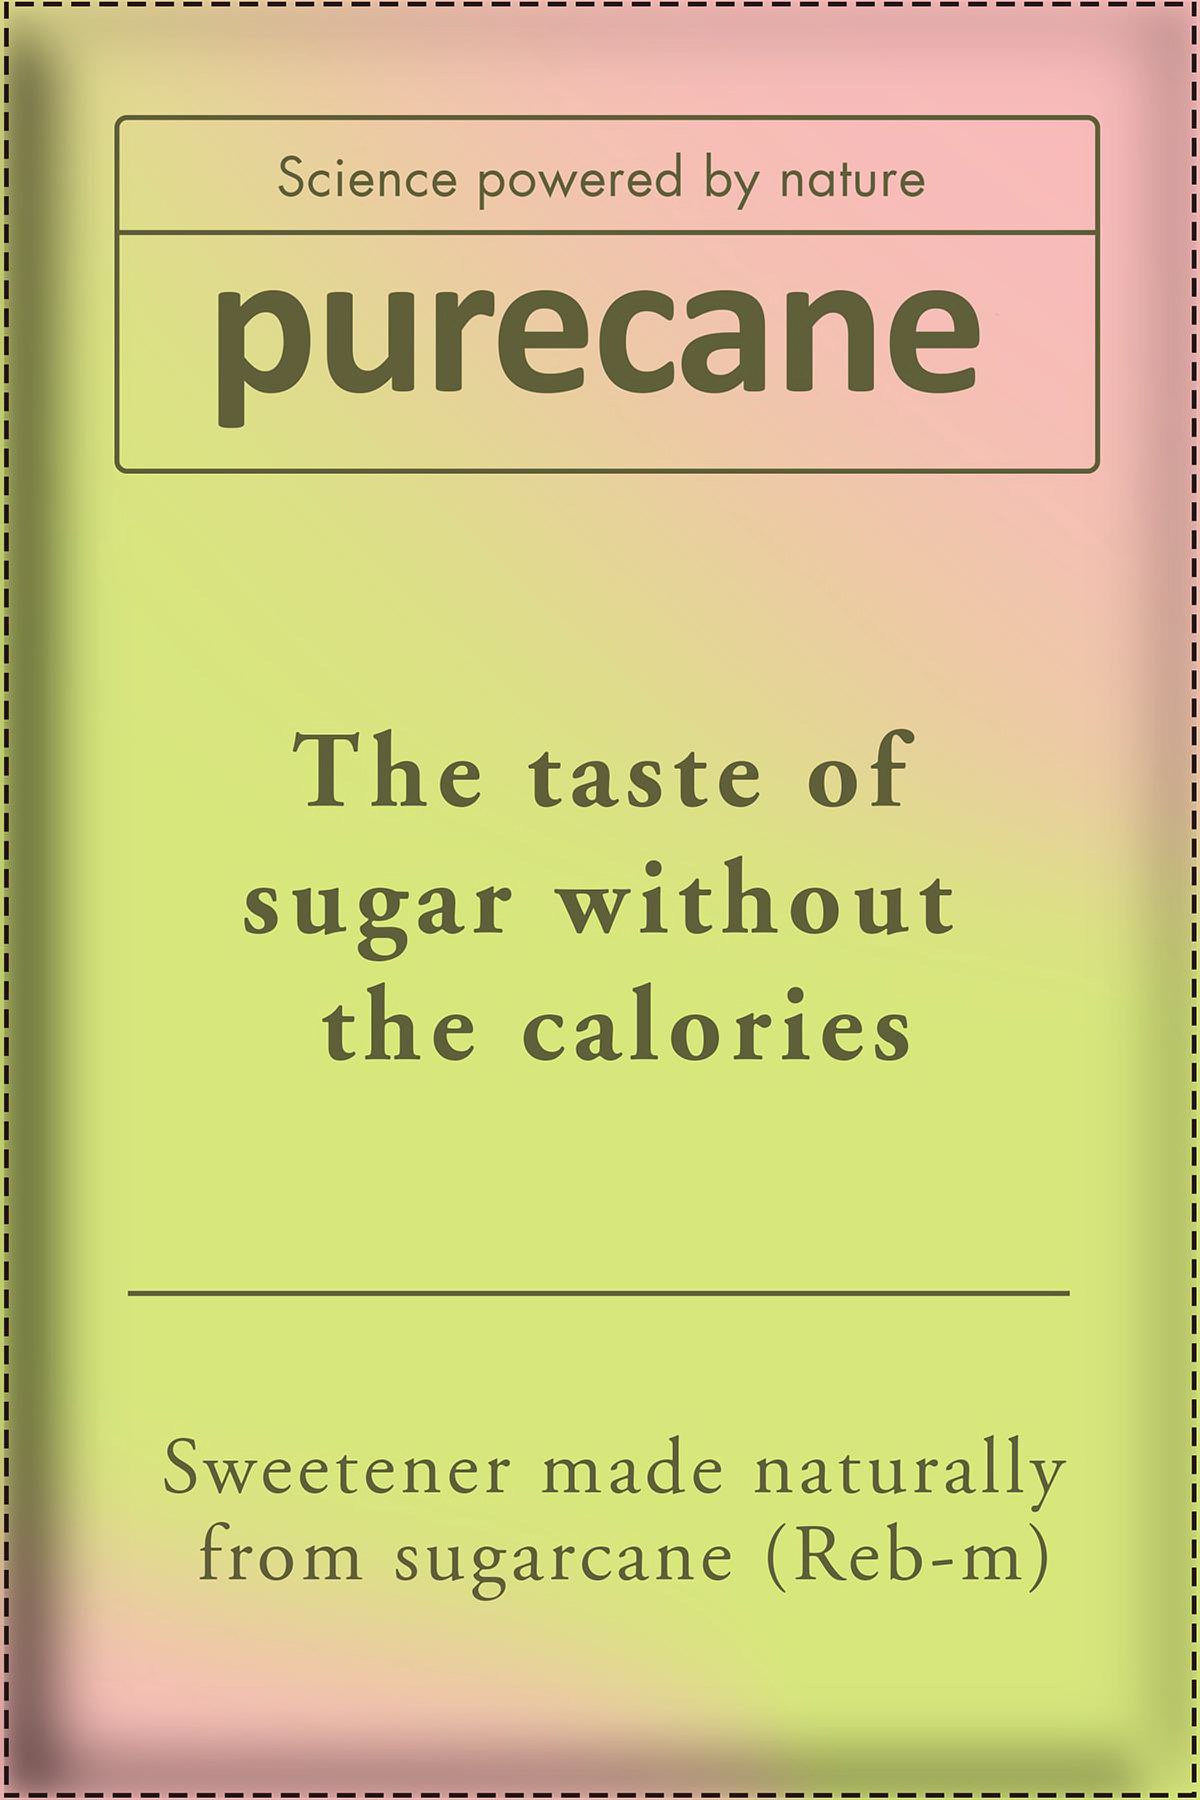  SCIENCE POWERED BY NATURE PURECANE THE TASTE OF SUGAR WITHOUT THE CALORIES SWEETENER MADE NATURALLY FROM SUGARCANE (REB-M)